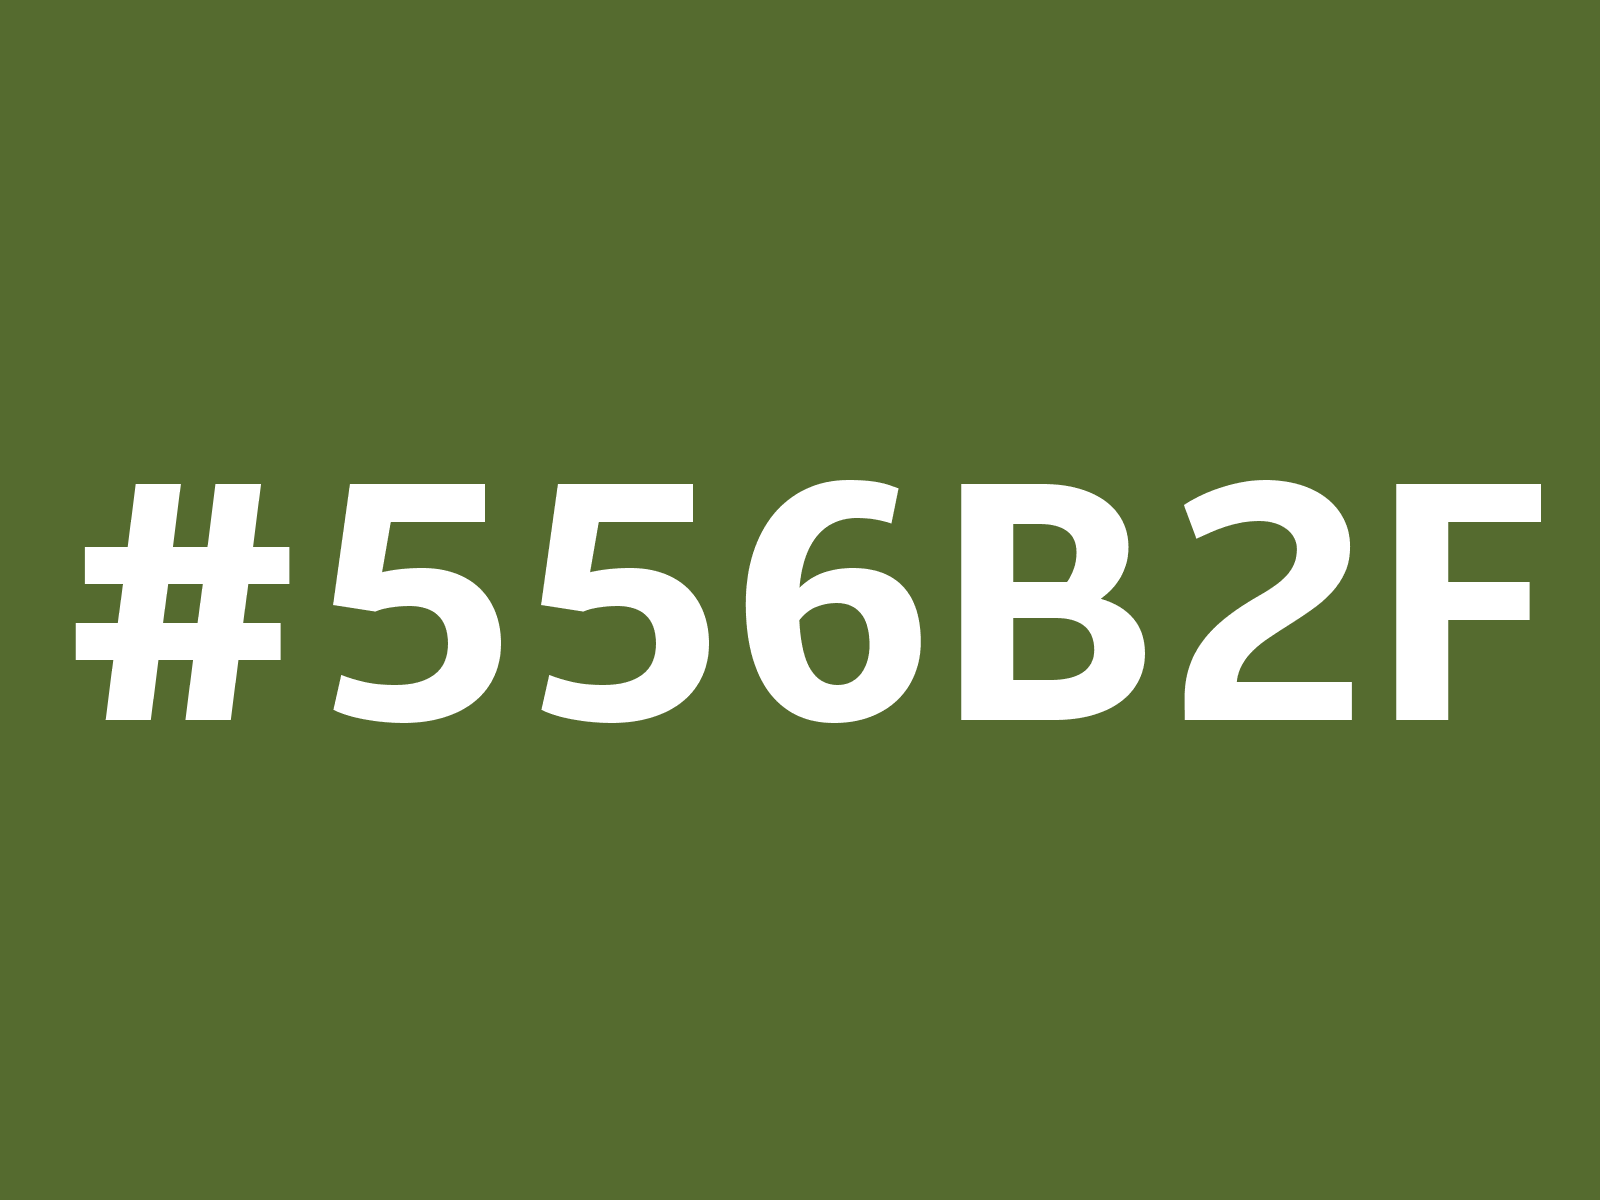 colorswall on X: Tints of Dark Olive Green #556B2F hex color